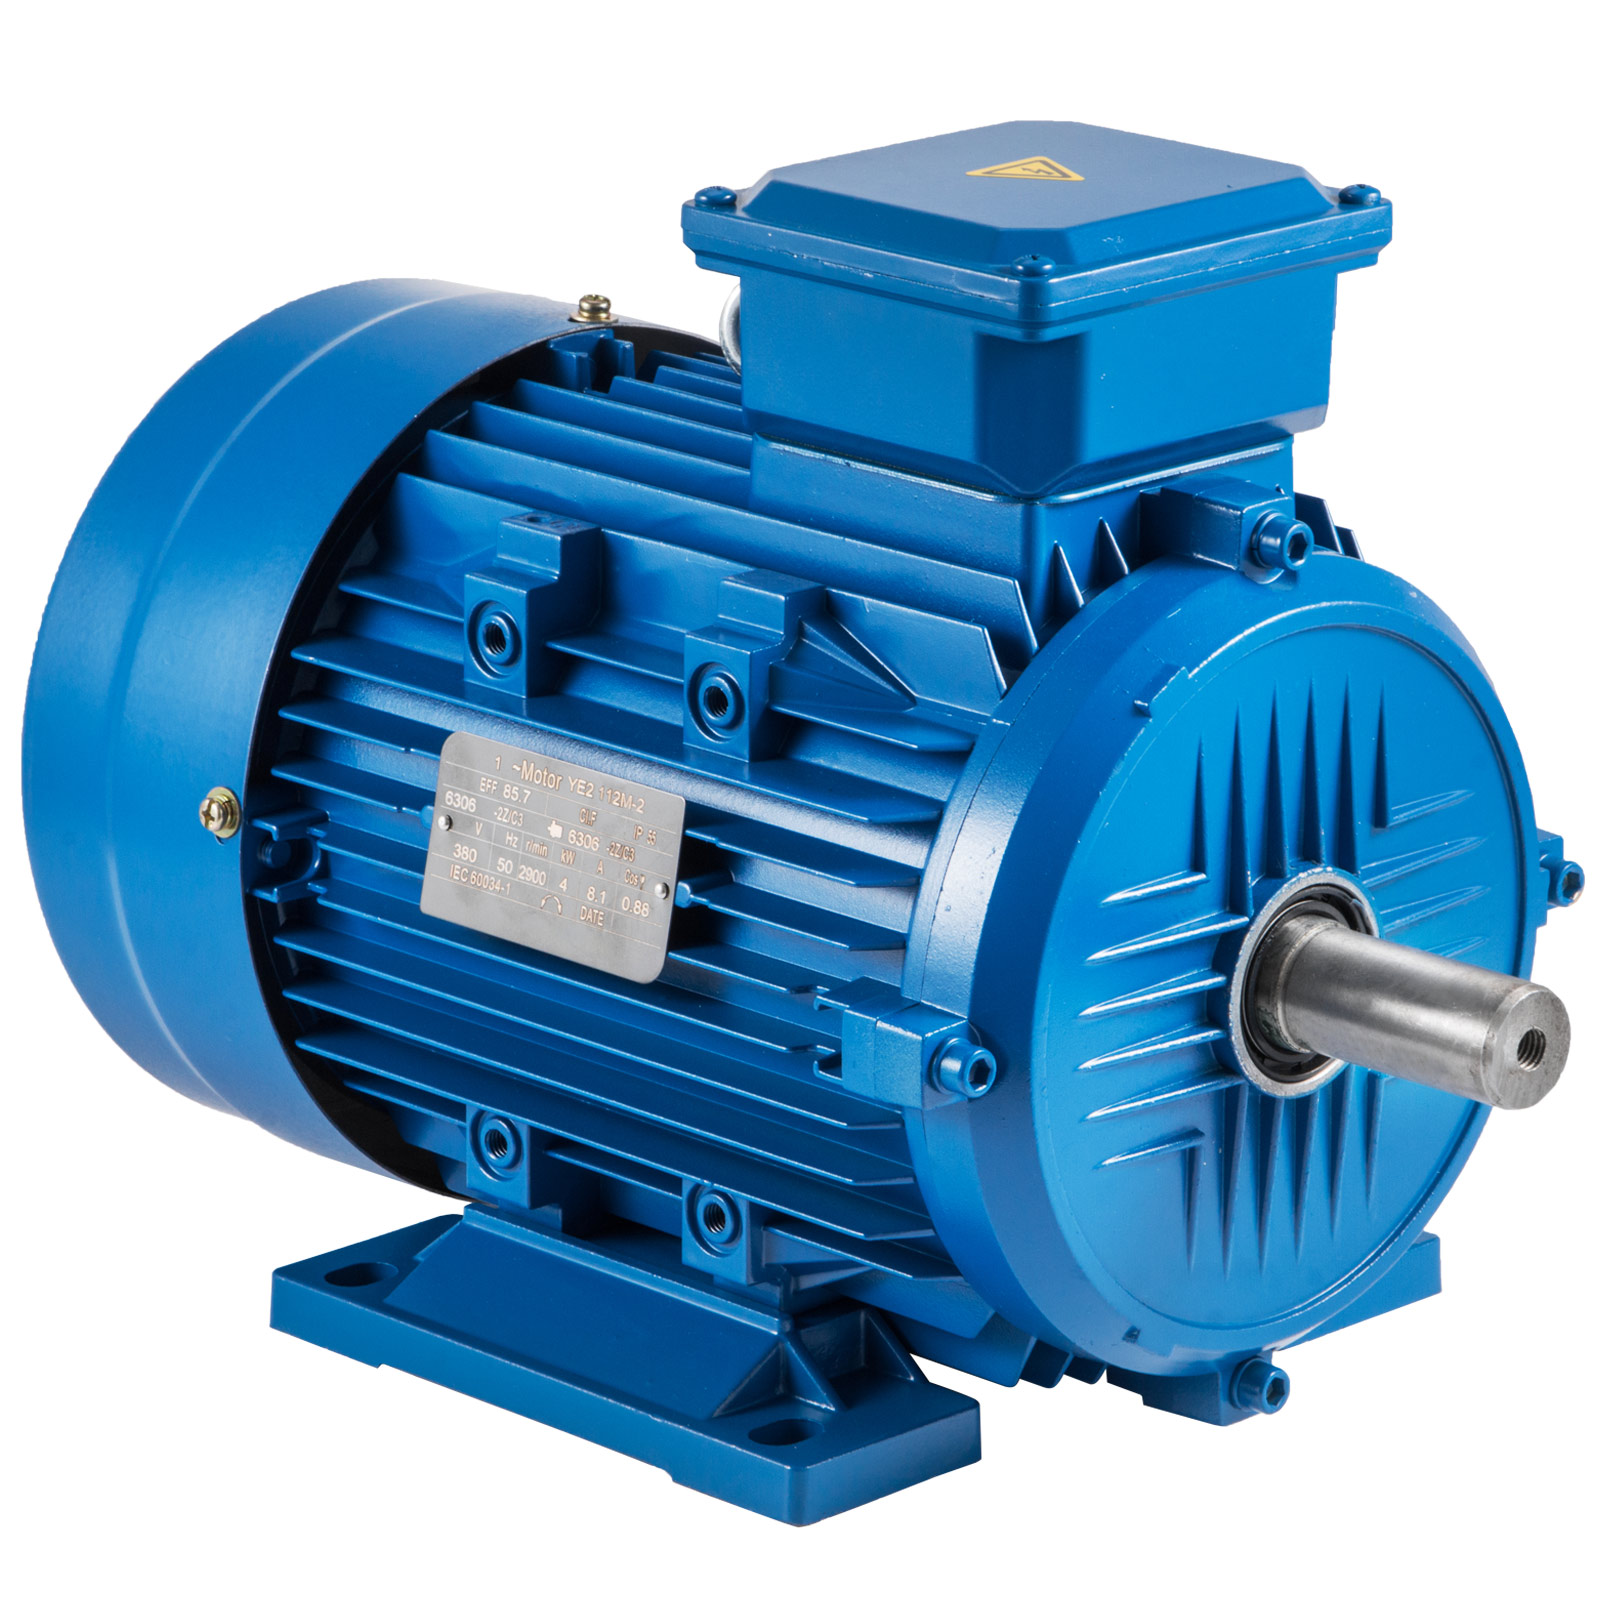 Electric Motor 3phase 3000 Rpm 4kw Diameter 19mm Pro On Industry Supply от Vevor Many GEOs